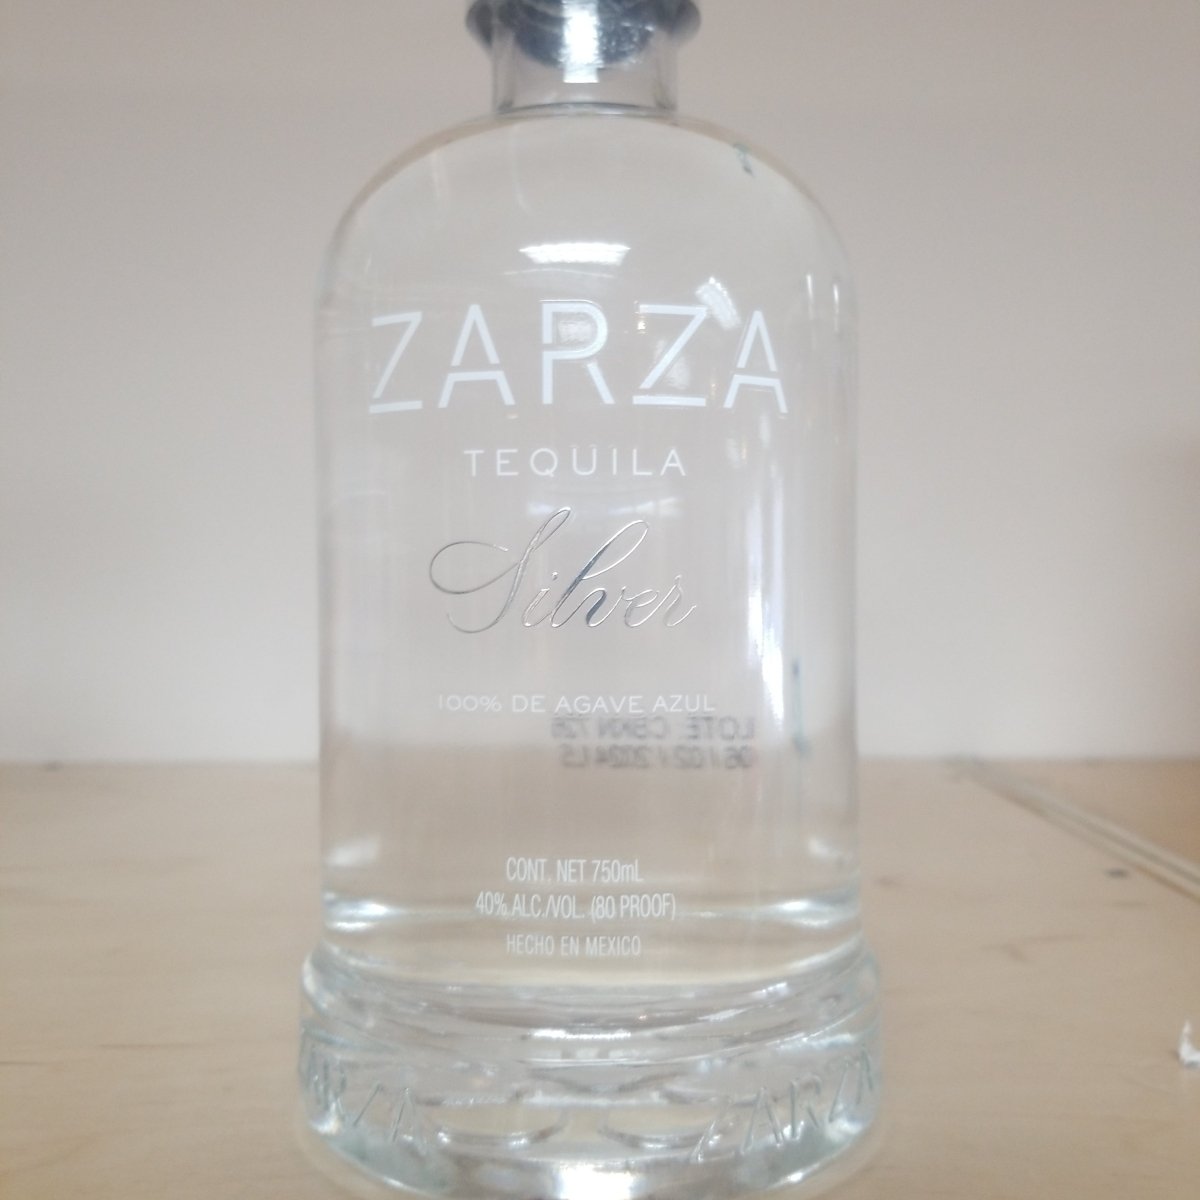 Zarza Blanco Tequila 750ml (Kosher for Passover) - Sip &amp; Say